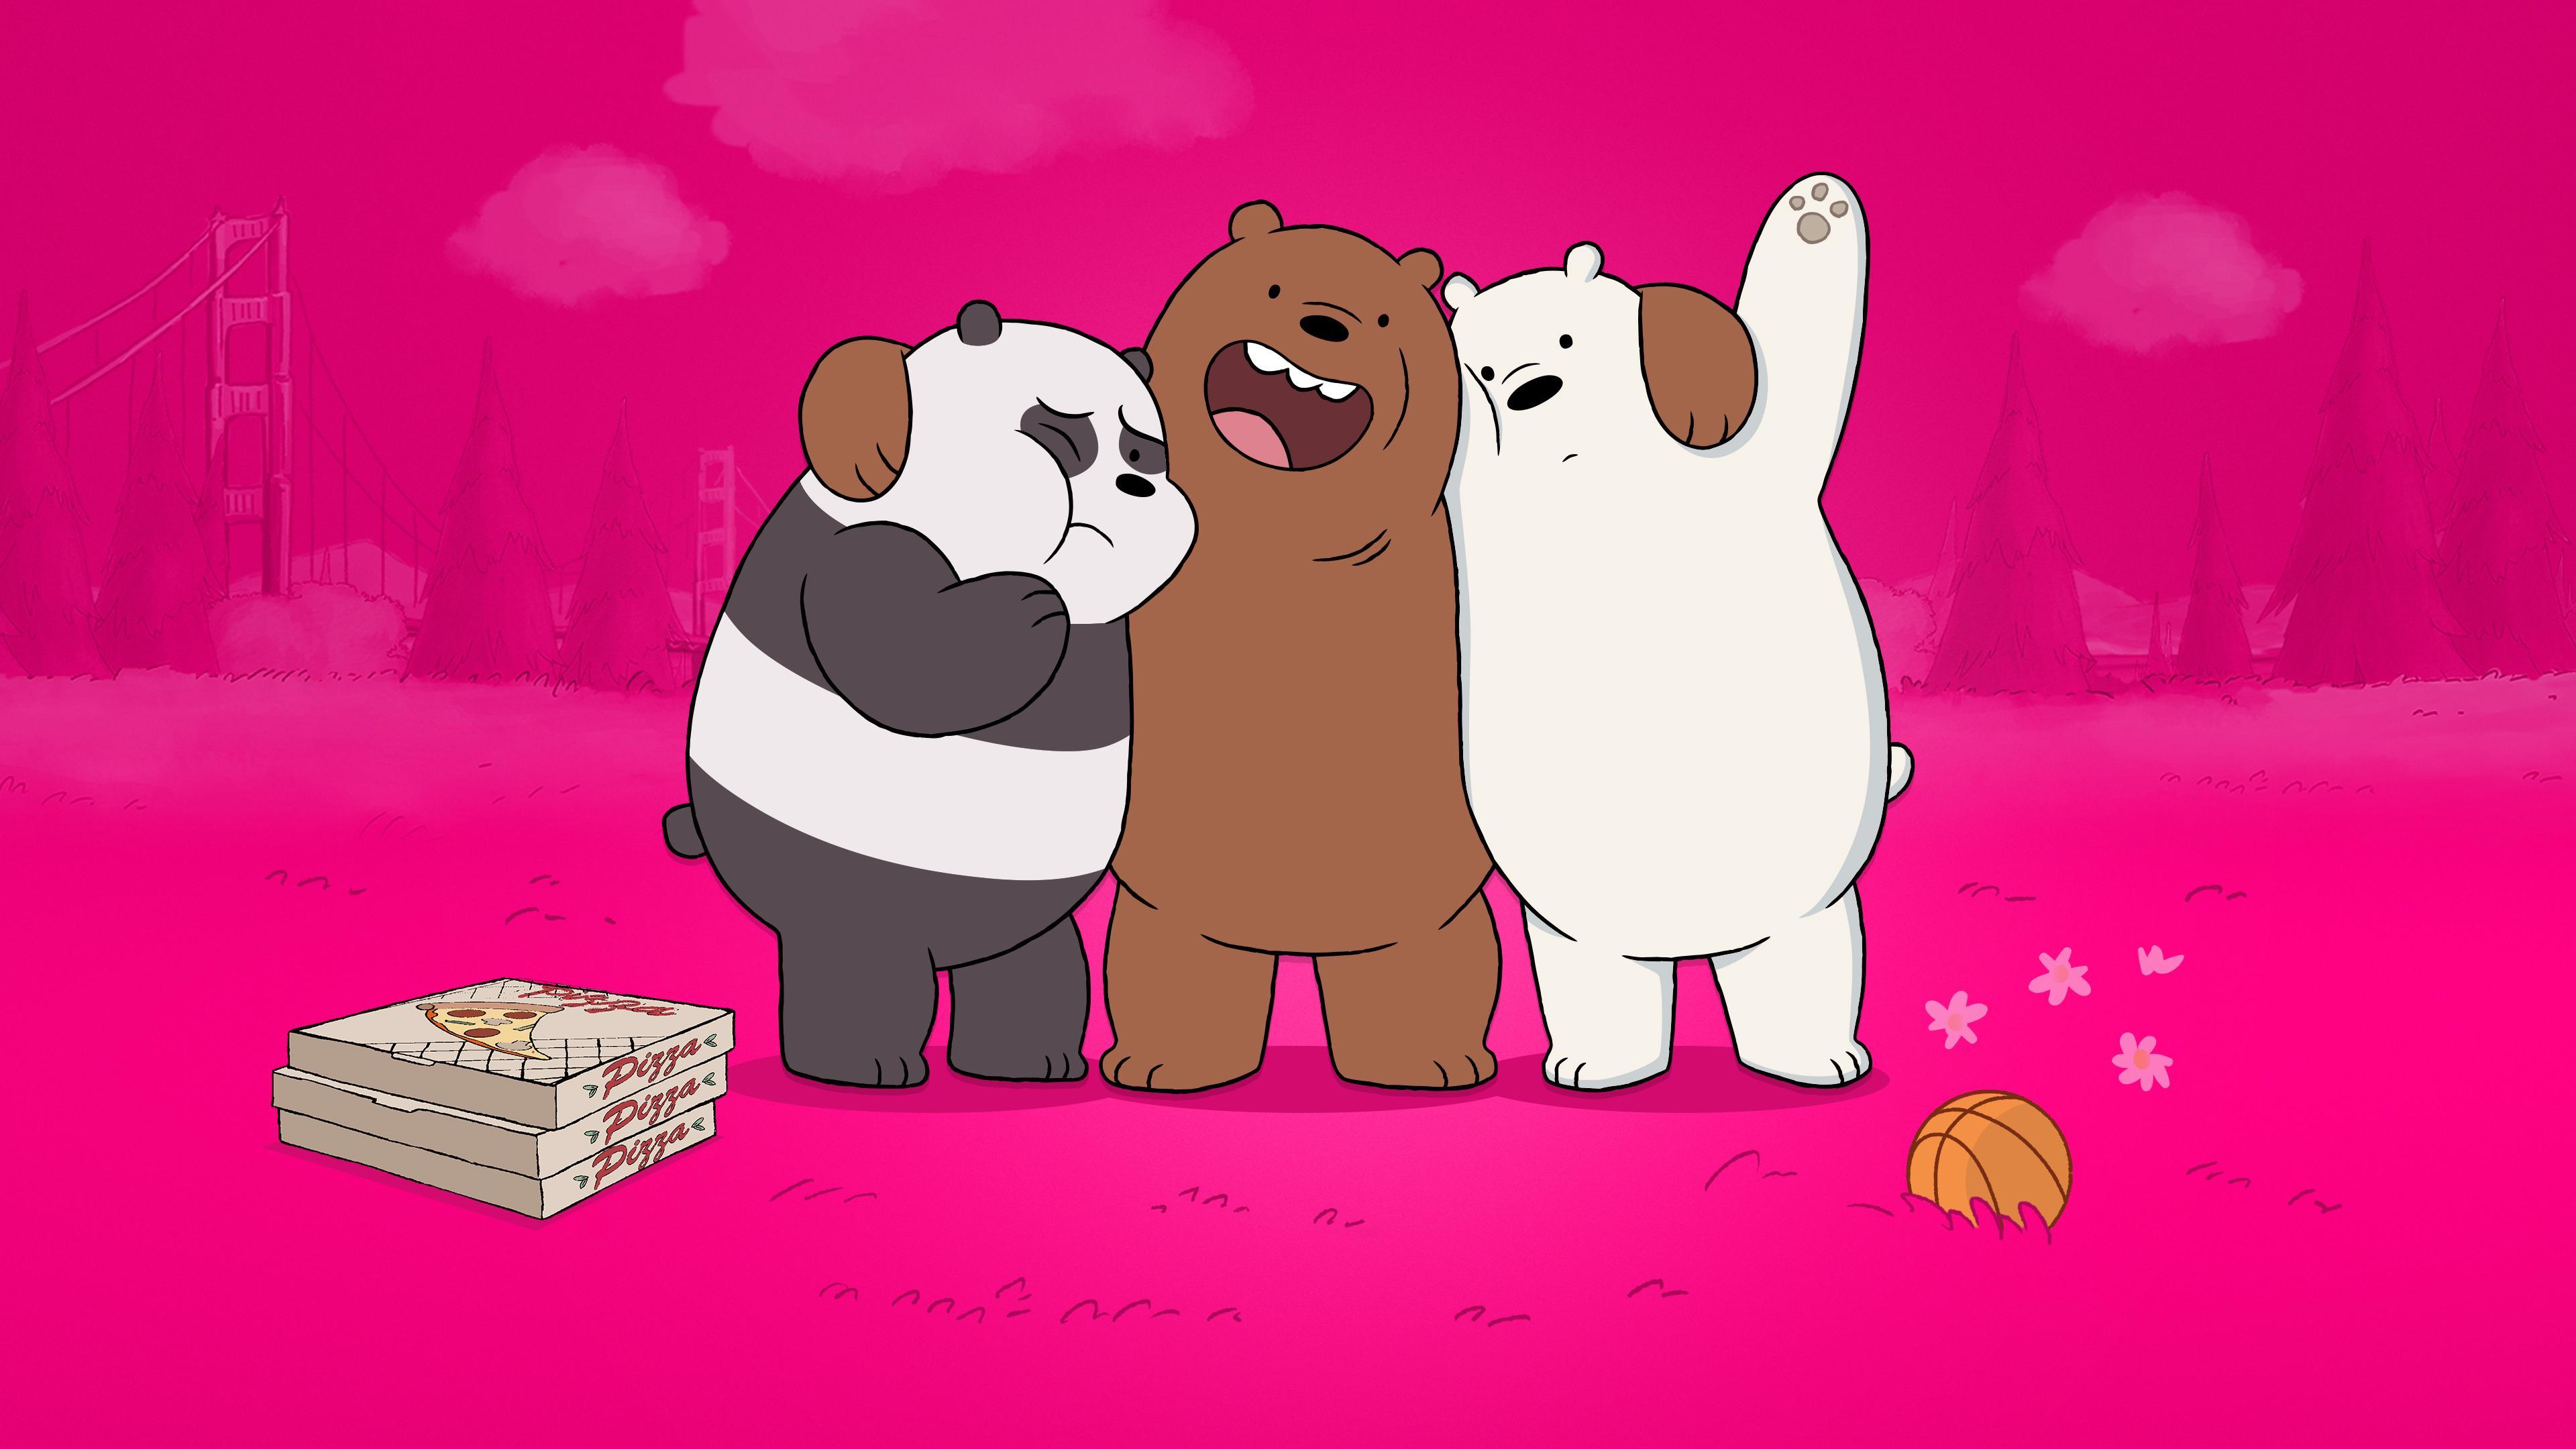 Three animated bears stand together on a pink landscape, one is striped black and white, one is brown, and one is a white polar bear. Next to the bears in the pink grass there is a stack of three pizza boxes and a basketball. 